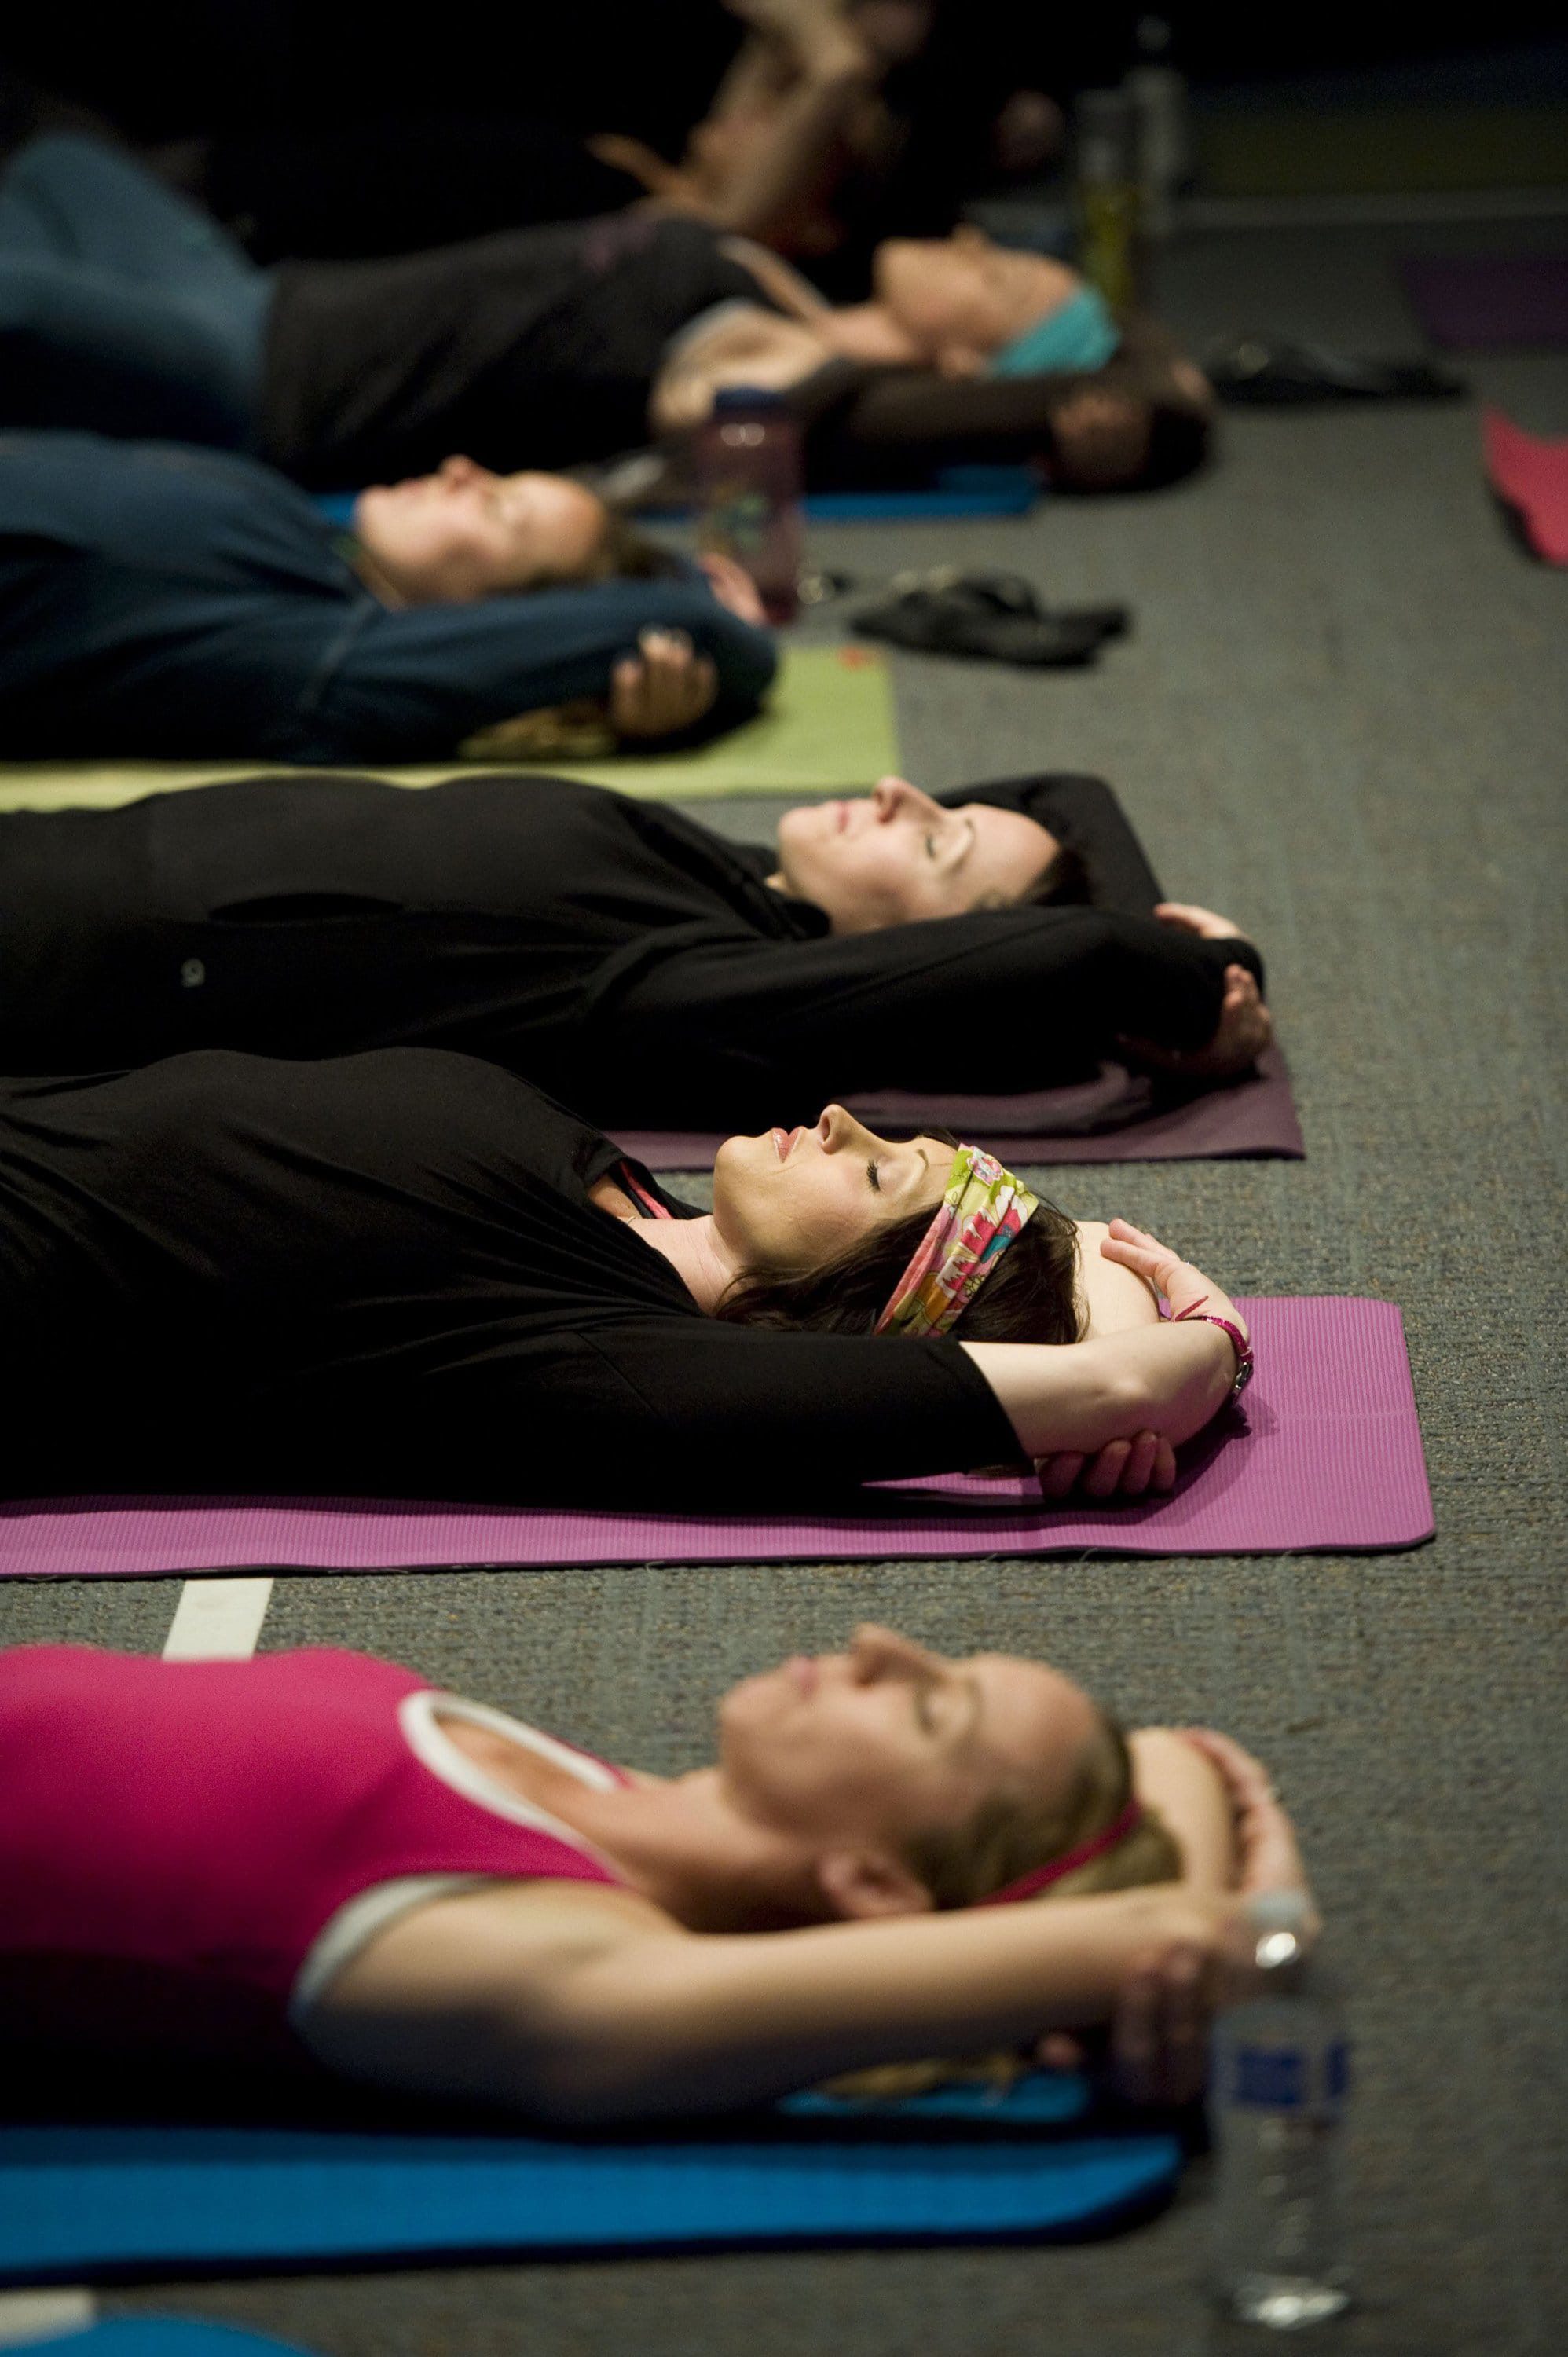 Attendees at a Holy Yoga class at Mariner's Church in Mission Viejo, Calif.